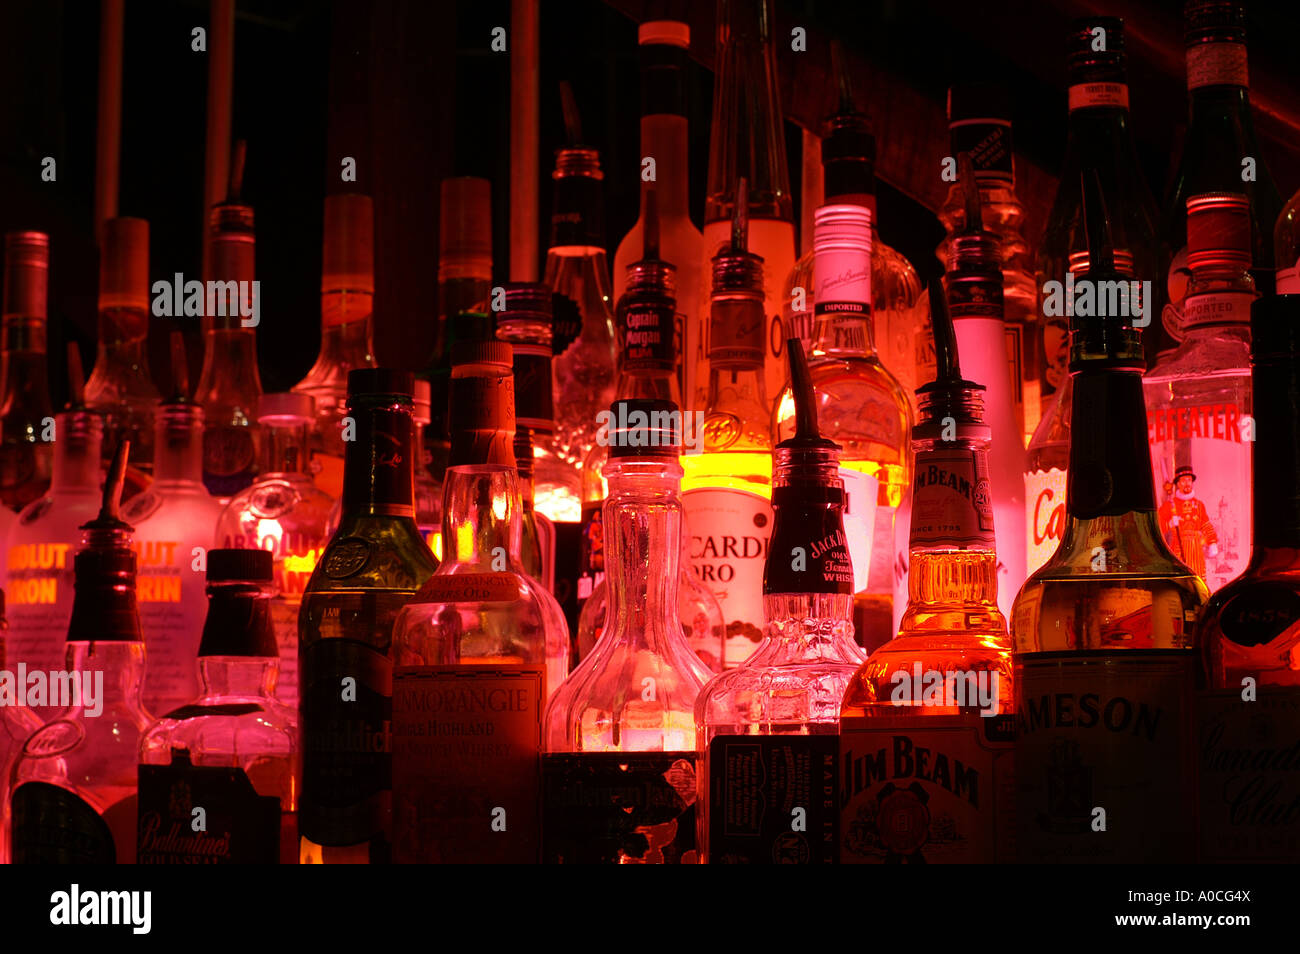 Bottles of spirits by night lit with a red lamp from a beach side bar in Dubai Stock Photo